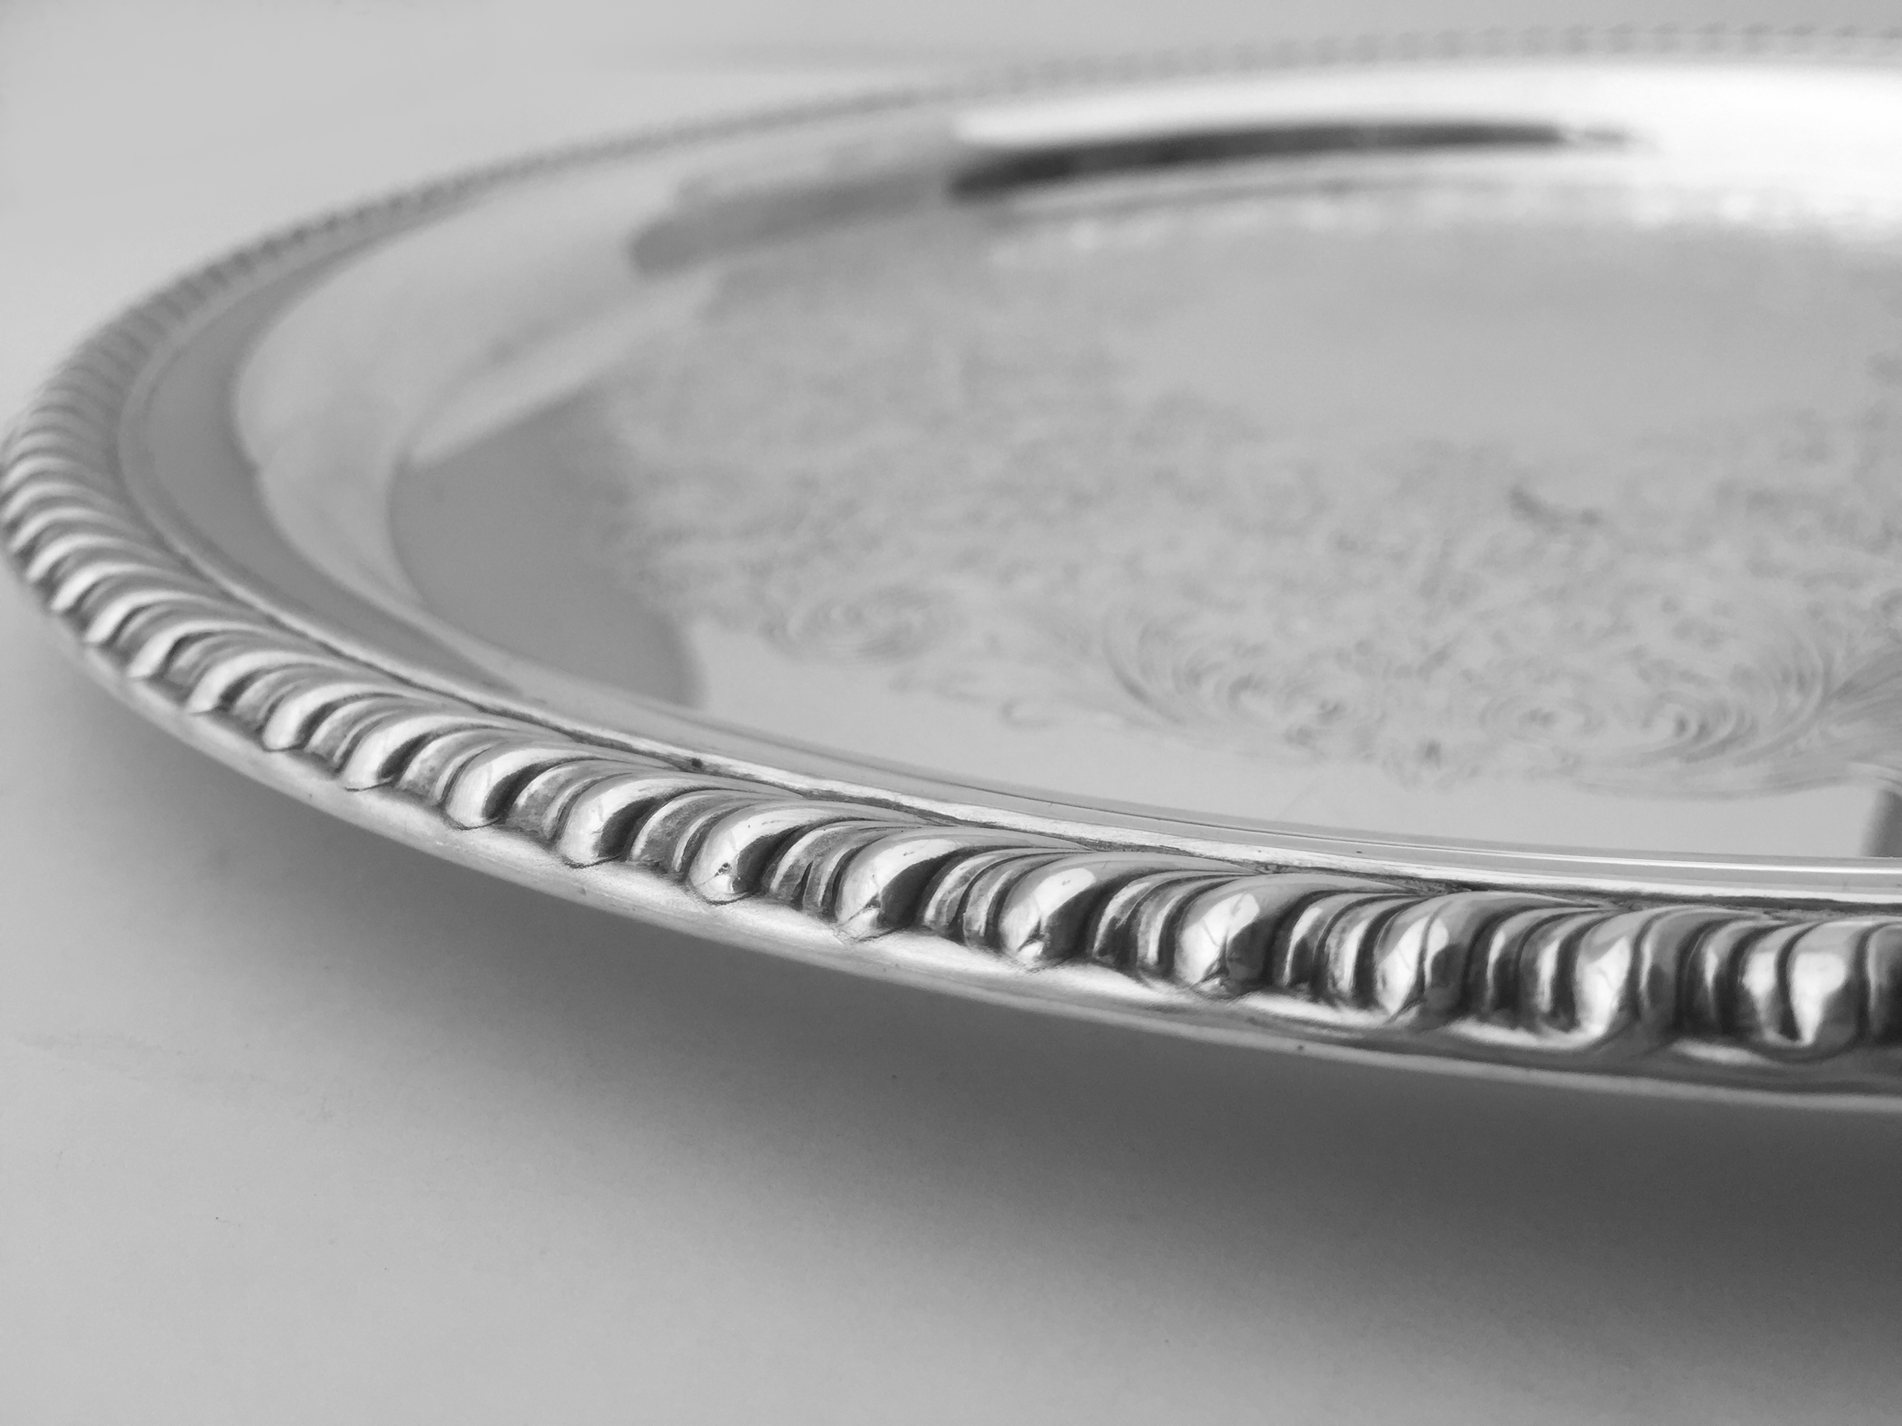 Vintage Silver Plate Tray used for upcycled earrings